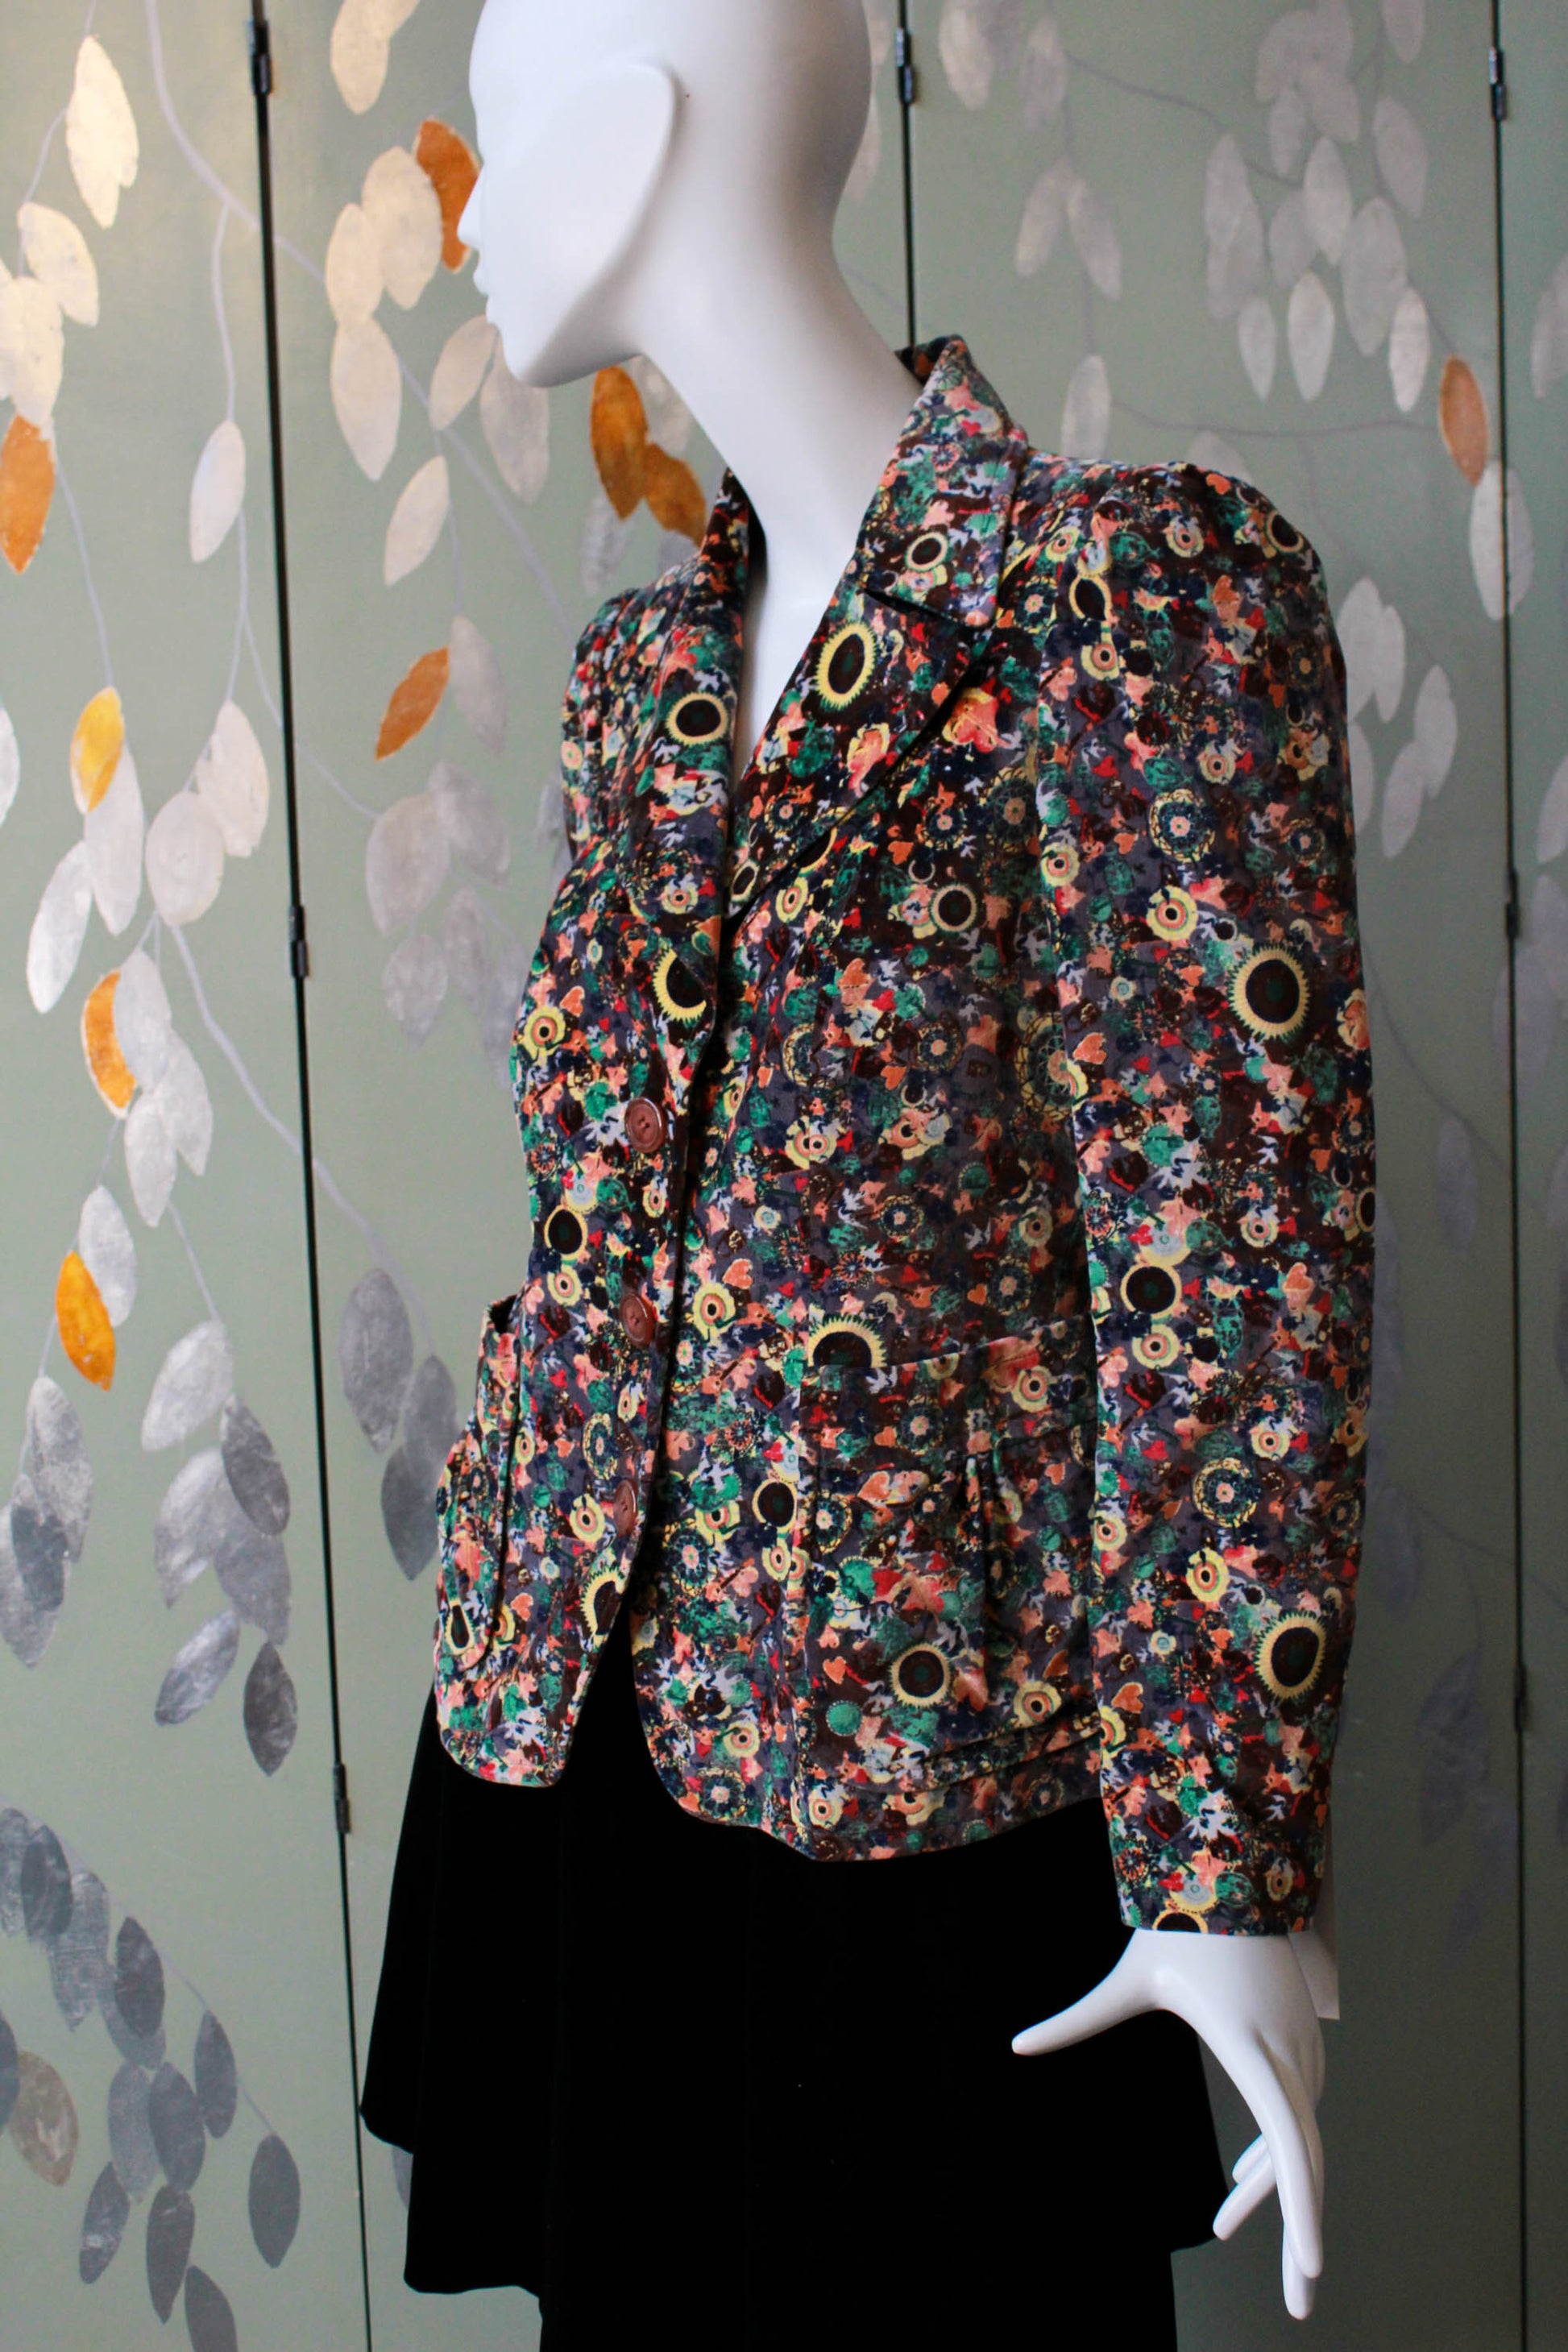 90s Christian Lacroix Floral Velvet Blazer with Pockets, and large collar